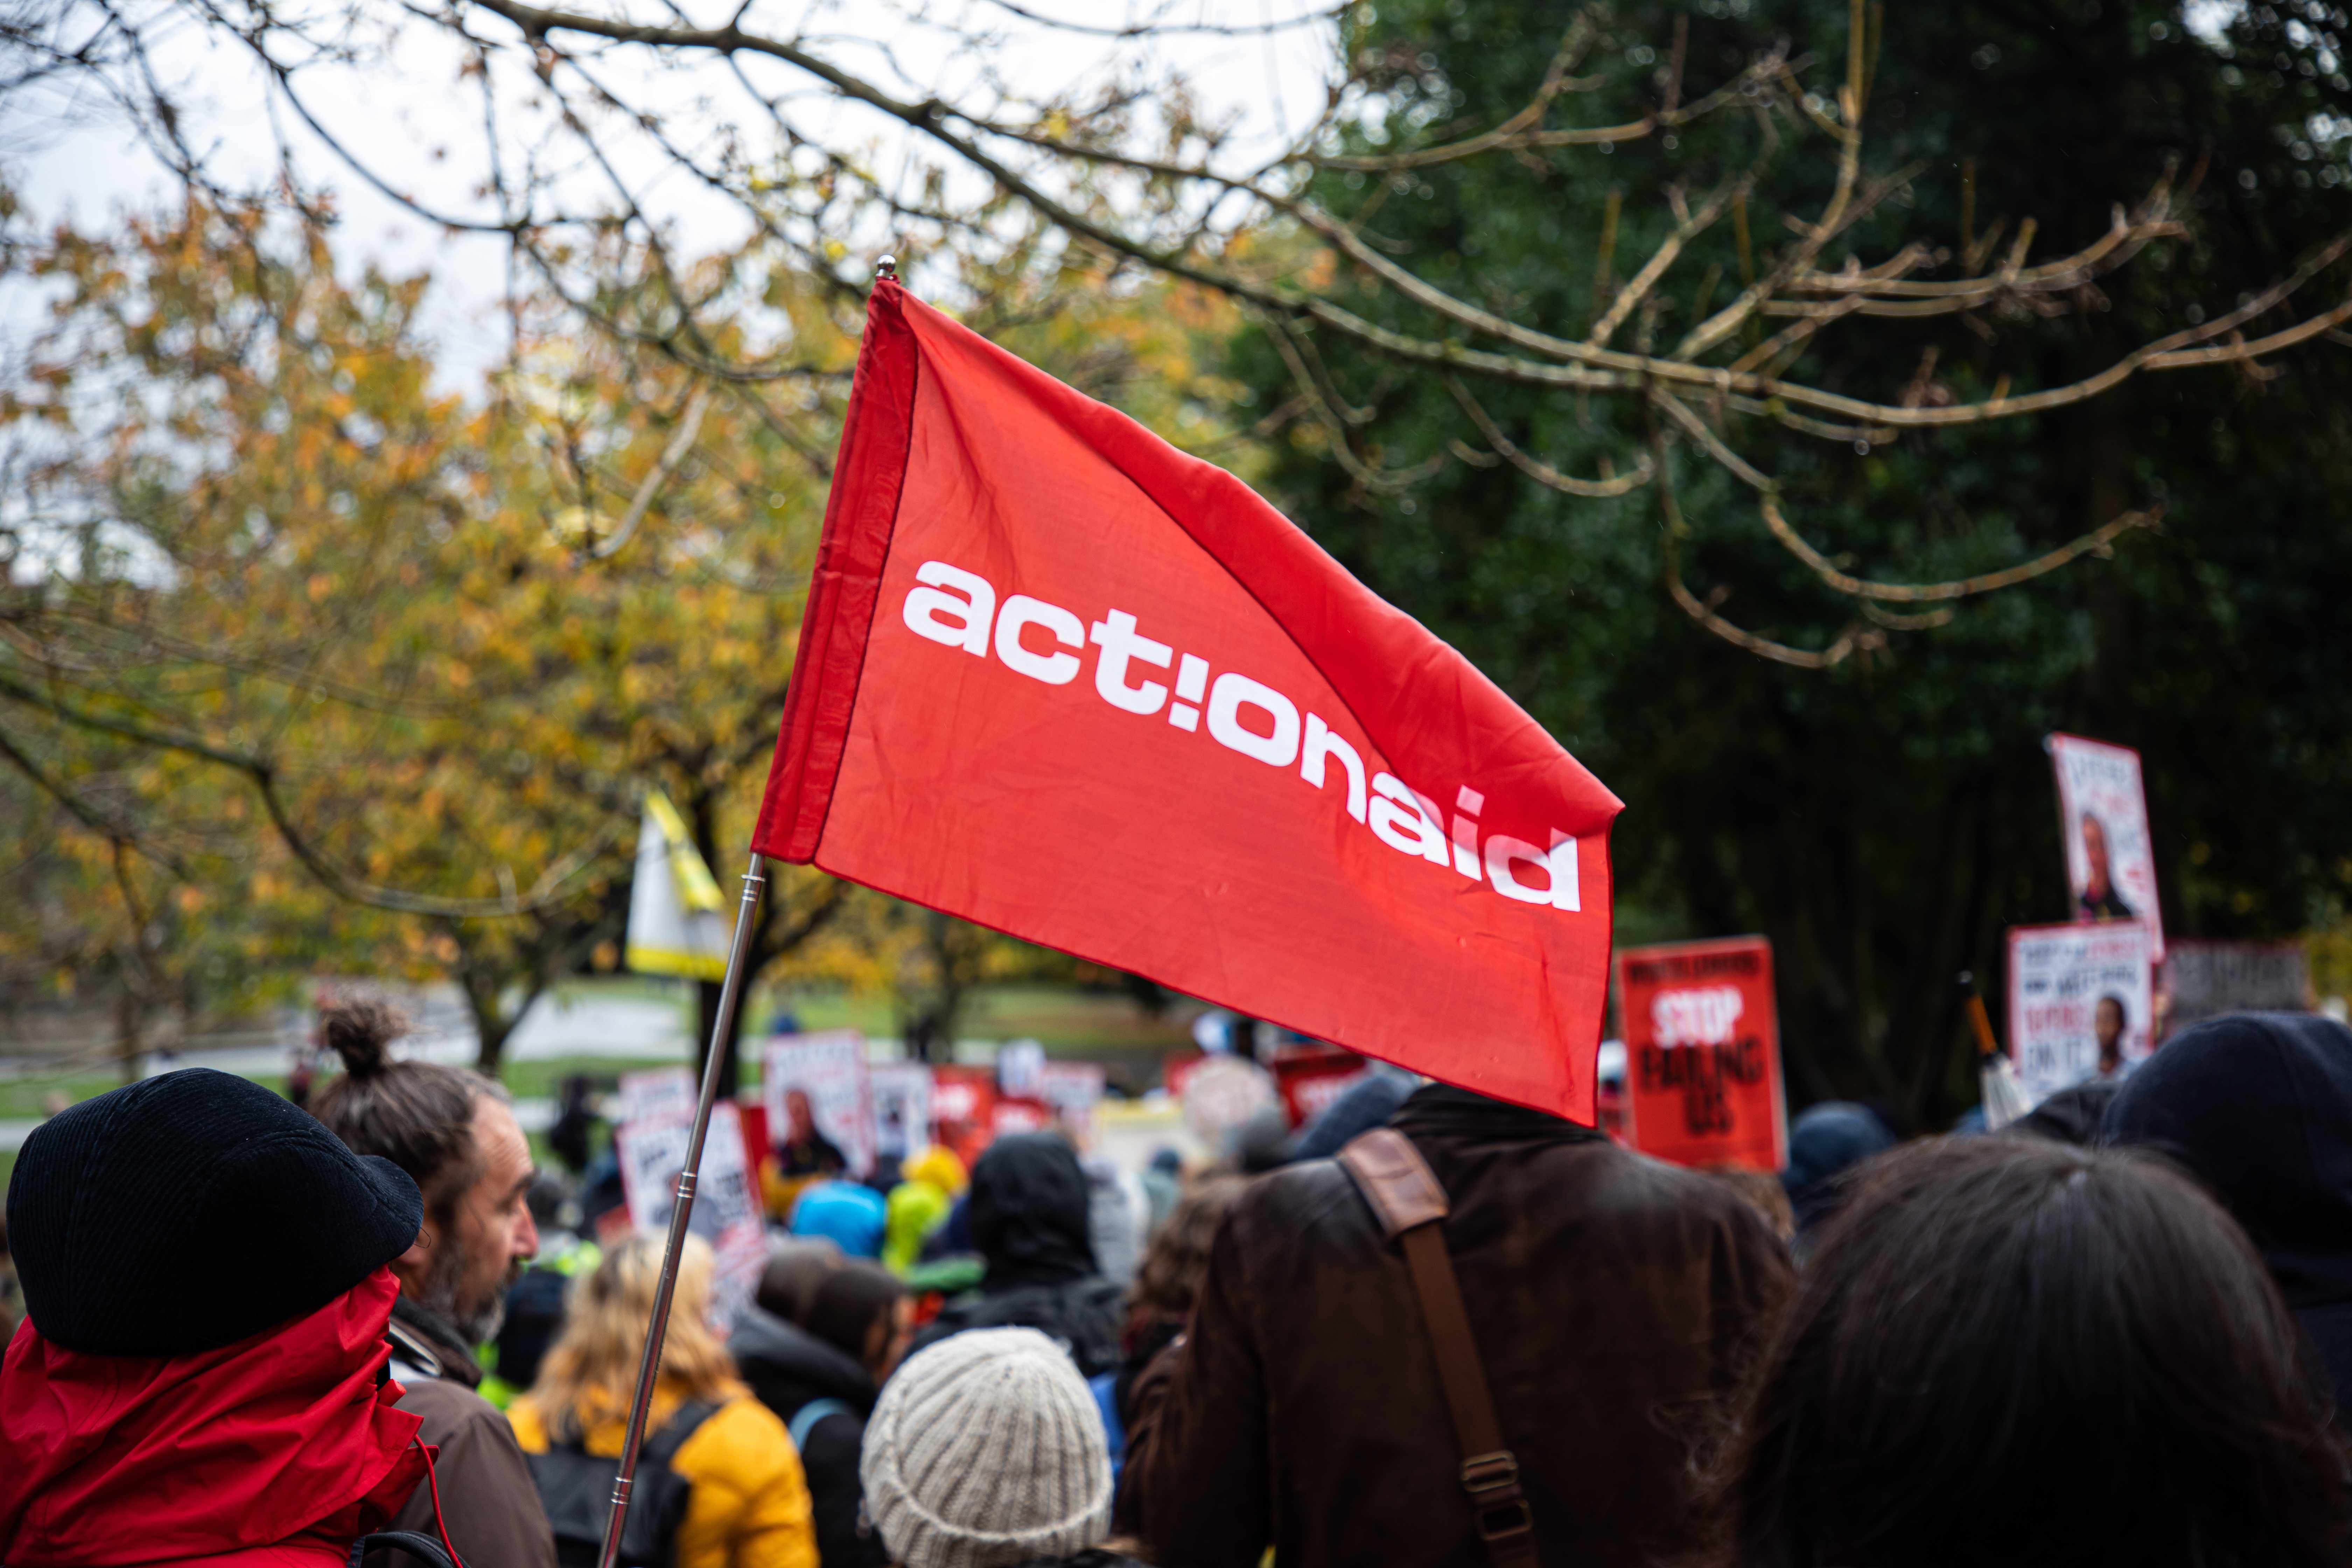 Photo of a red flag with the text "ActionAid" at the COP26 climate march in Glasgow.